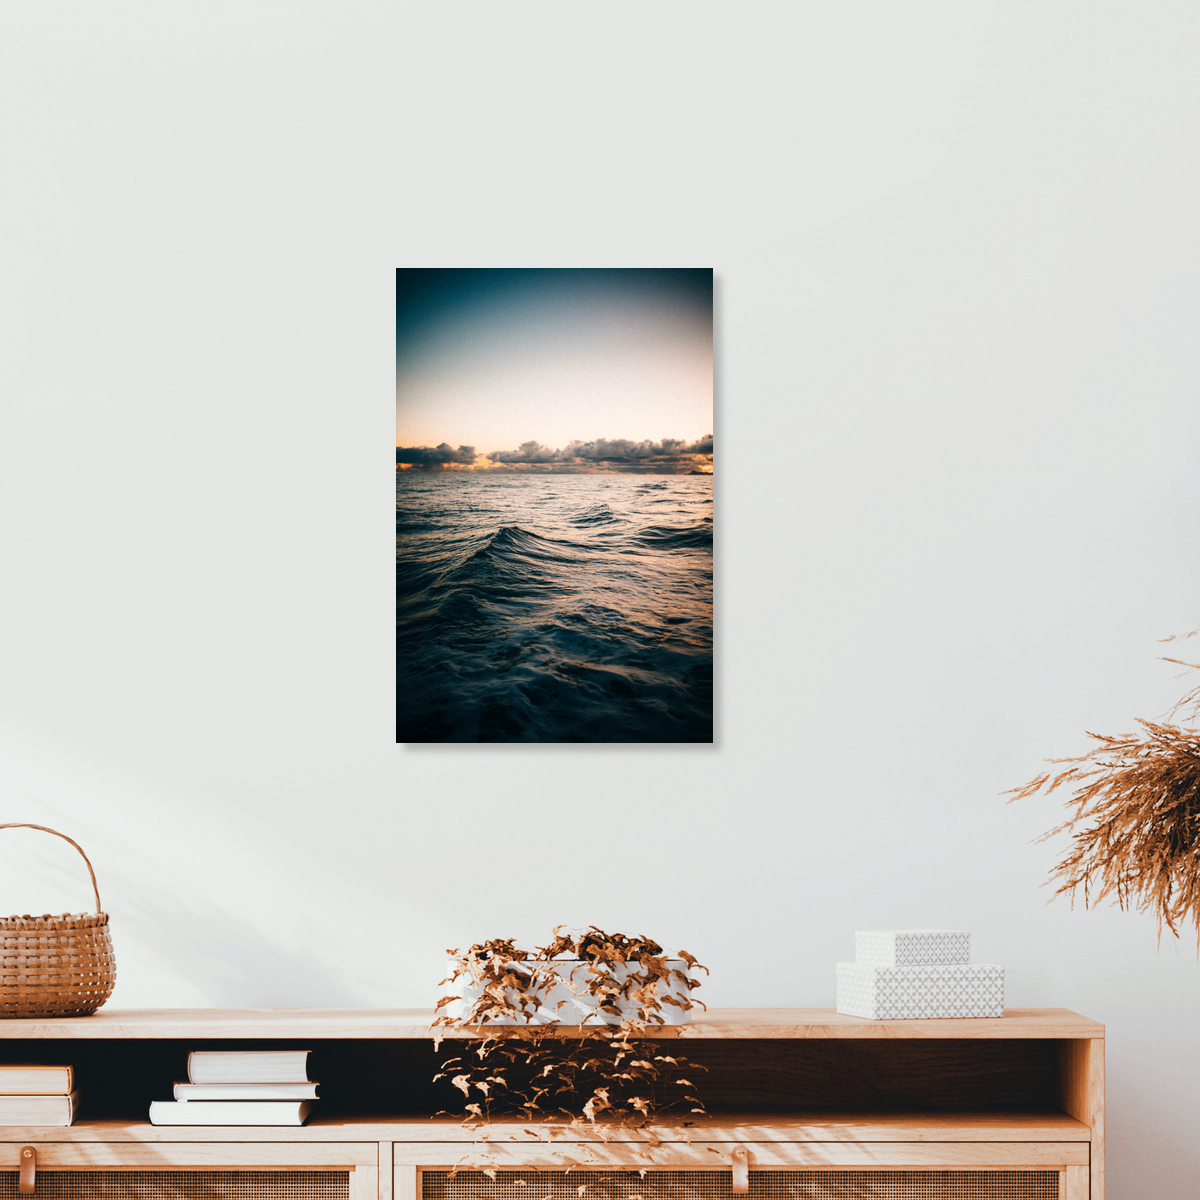 Wall Art 'Rough swell north of the Arctic Circle by Marco Leiter' - Premium  Poster, 20 x 30 cm | Photocircle.net